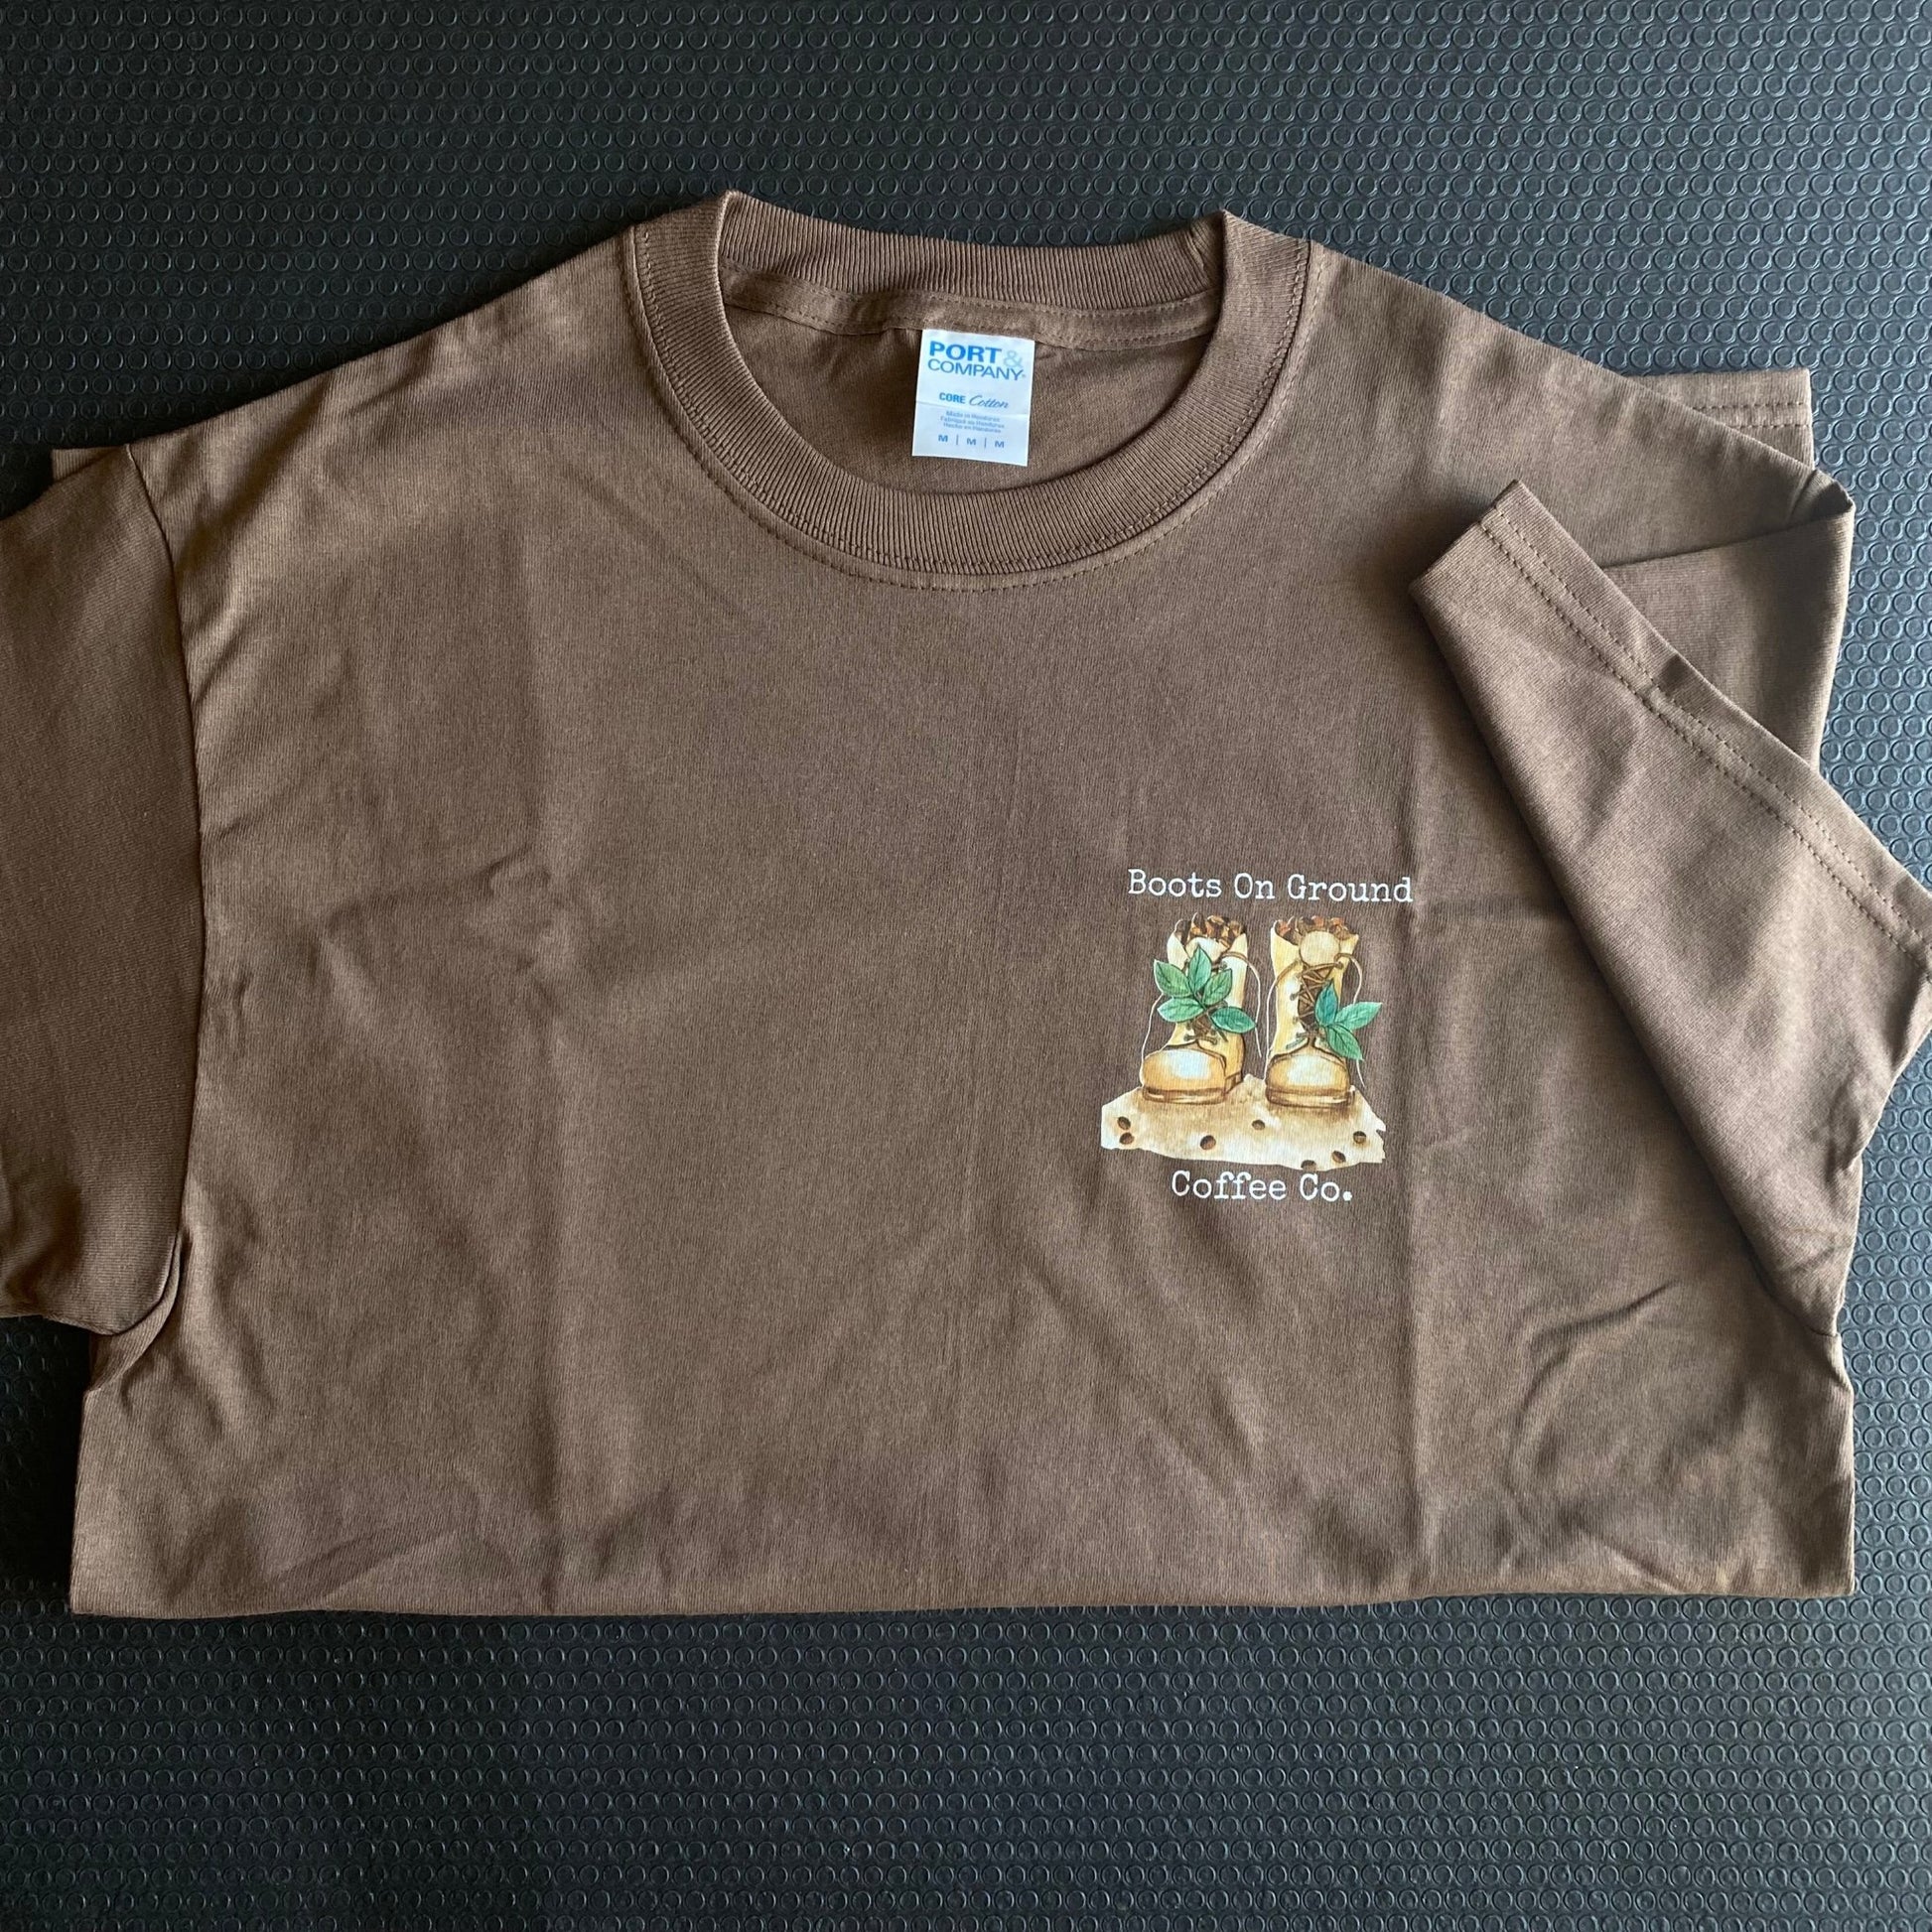 Brown Logo Tee - Boots on ground coffee co